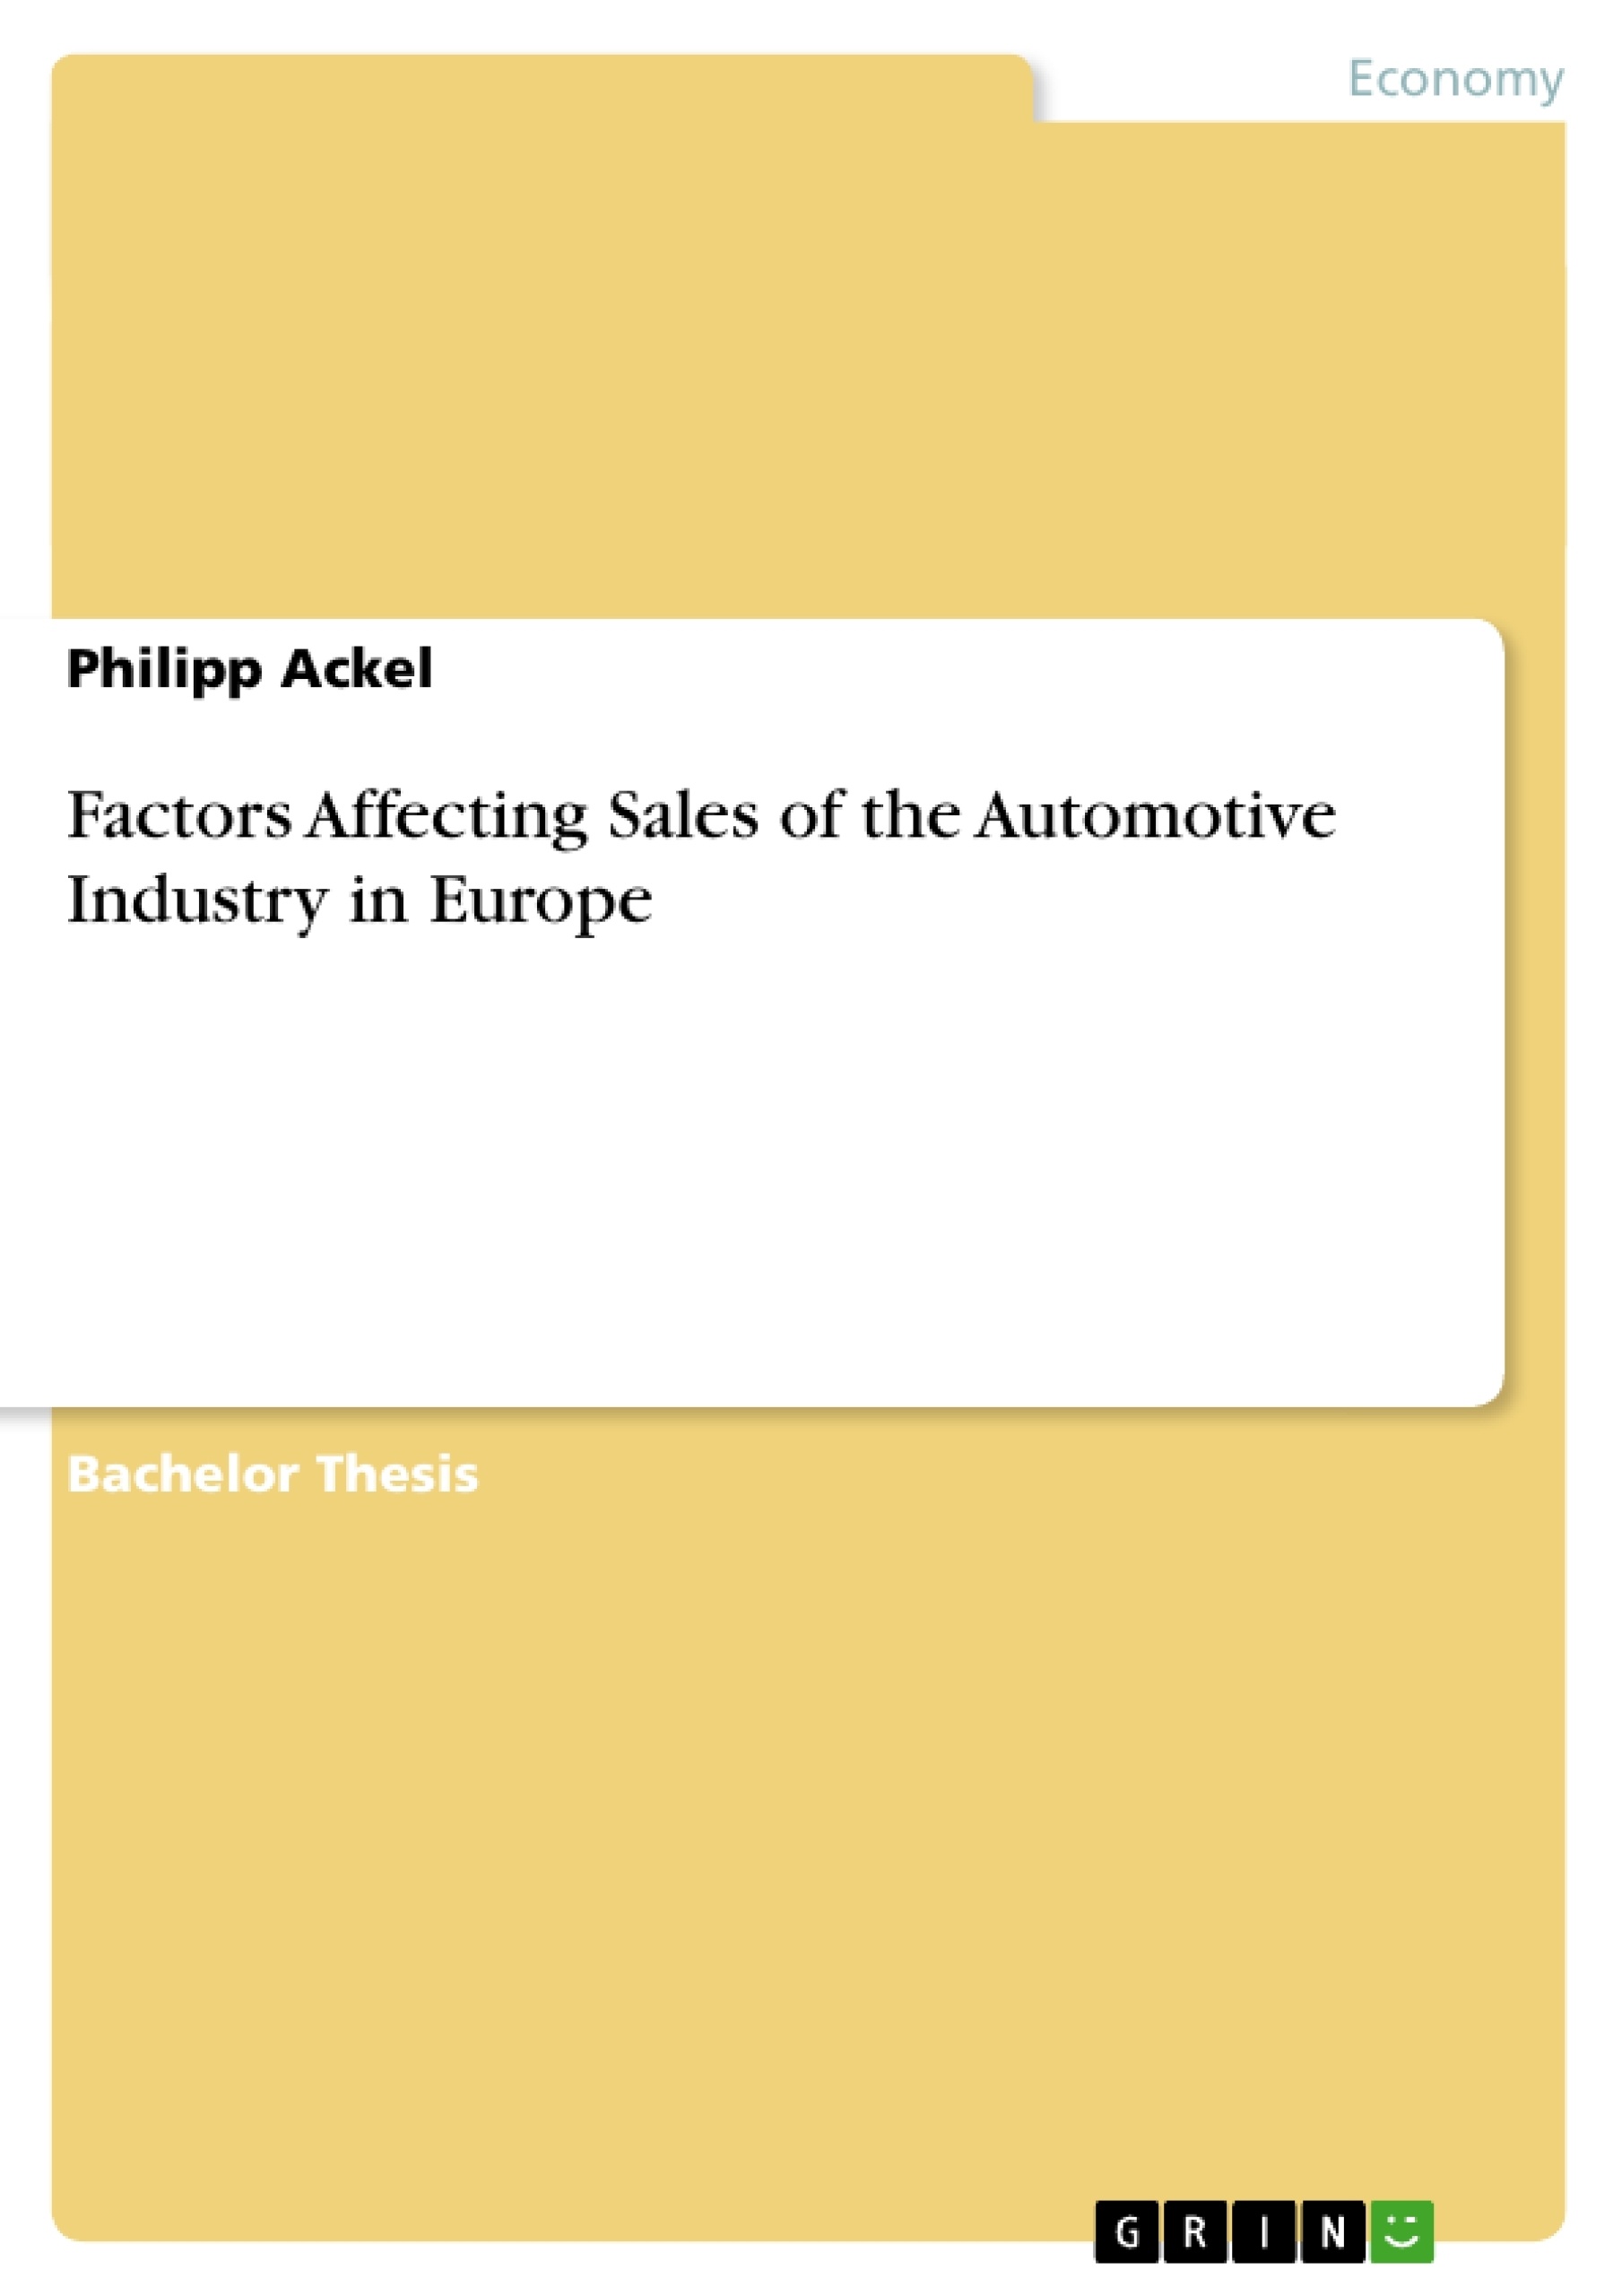 Title: Factors Affecting Sales of the Automotive Industry in Europe